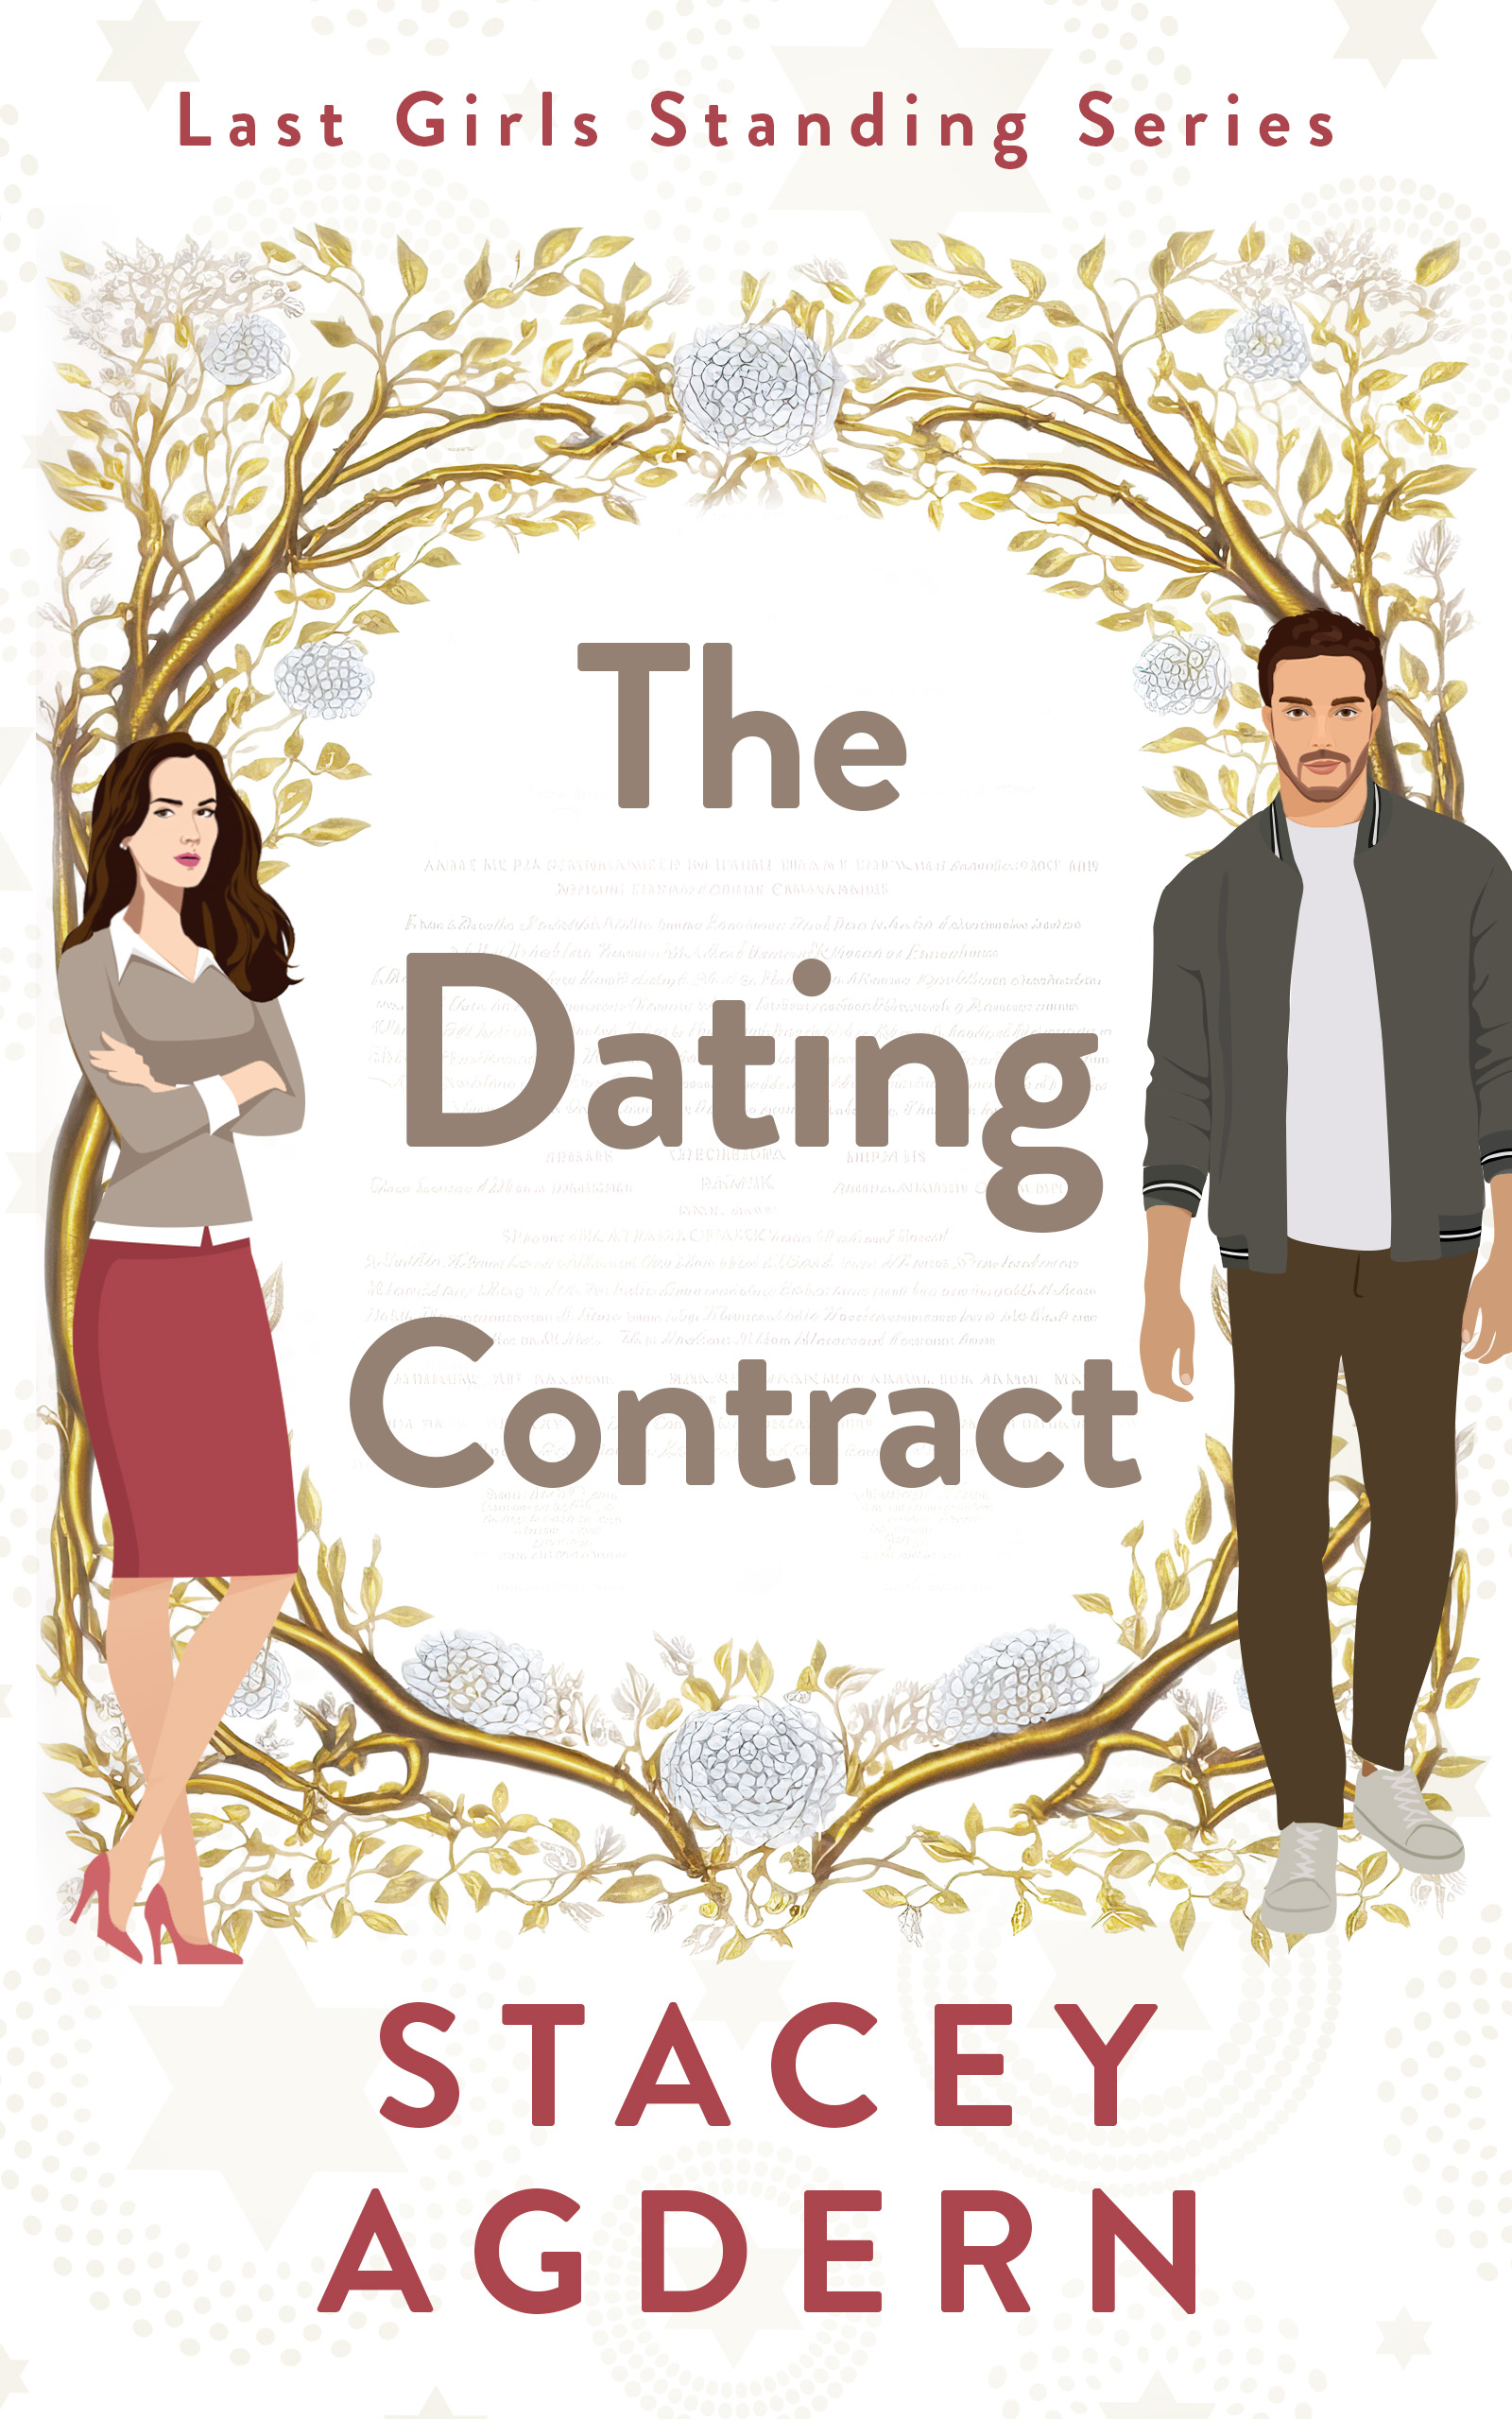 dating contract